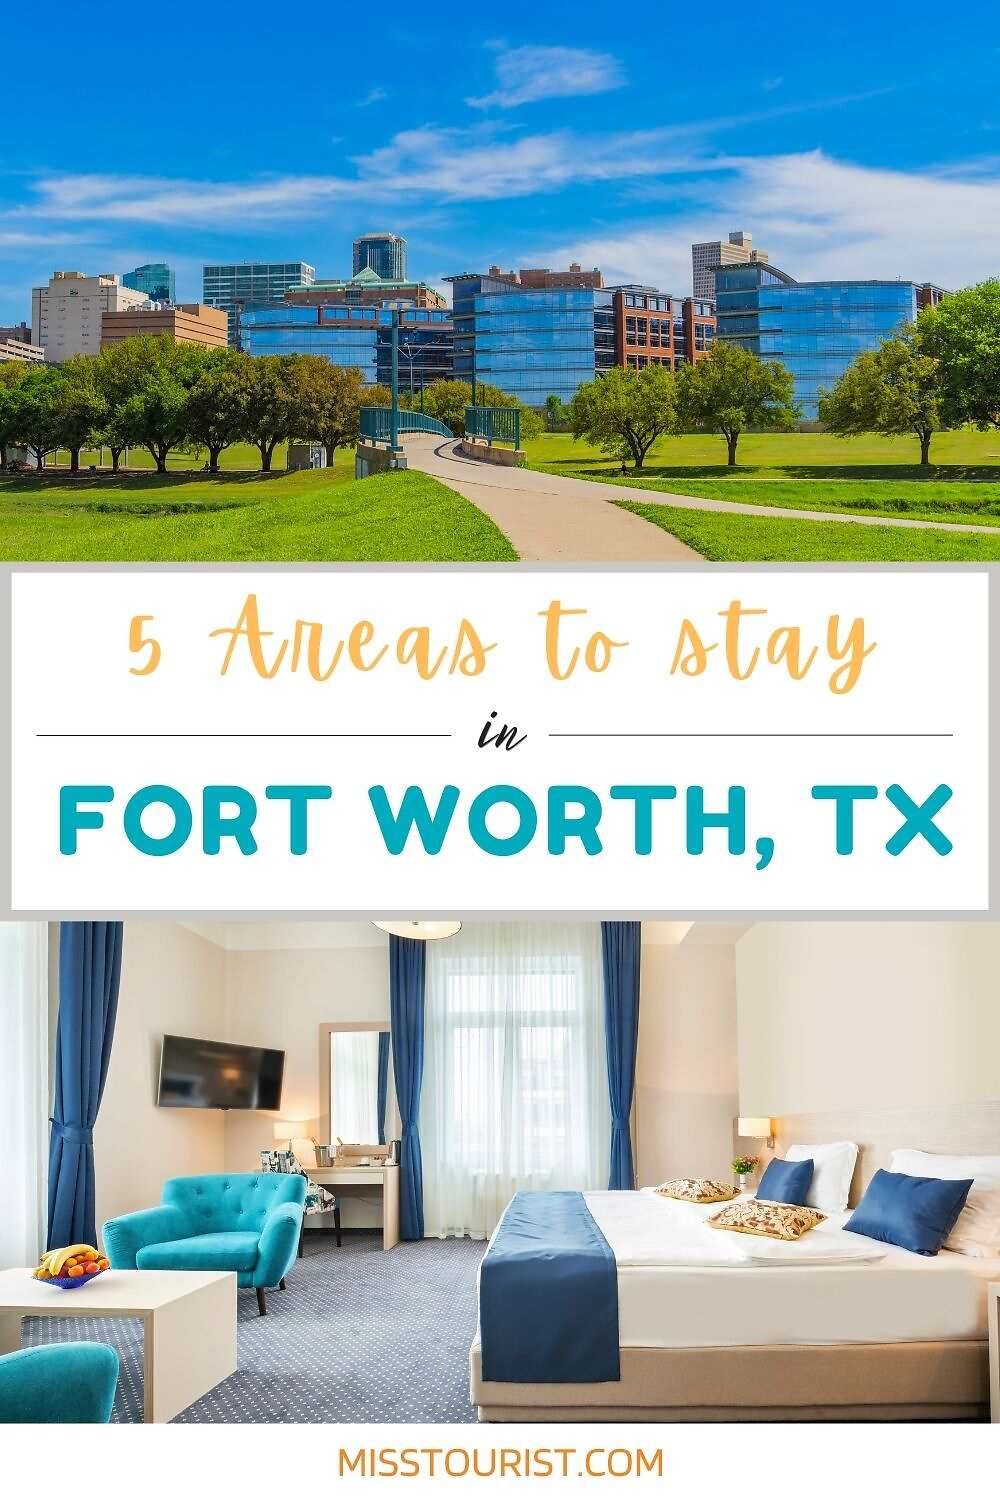 Promotional image for MissTourist.com featuring '5 Areas to Stay in FORT WORTH, TX' with a collage of Fort Worth's cityscape and a welcoming hotel room with modern decor.